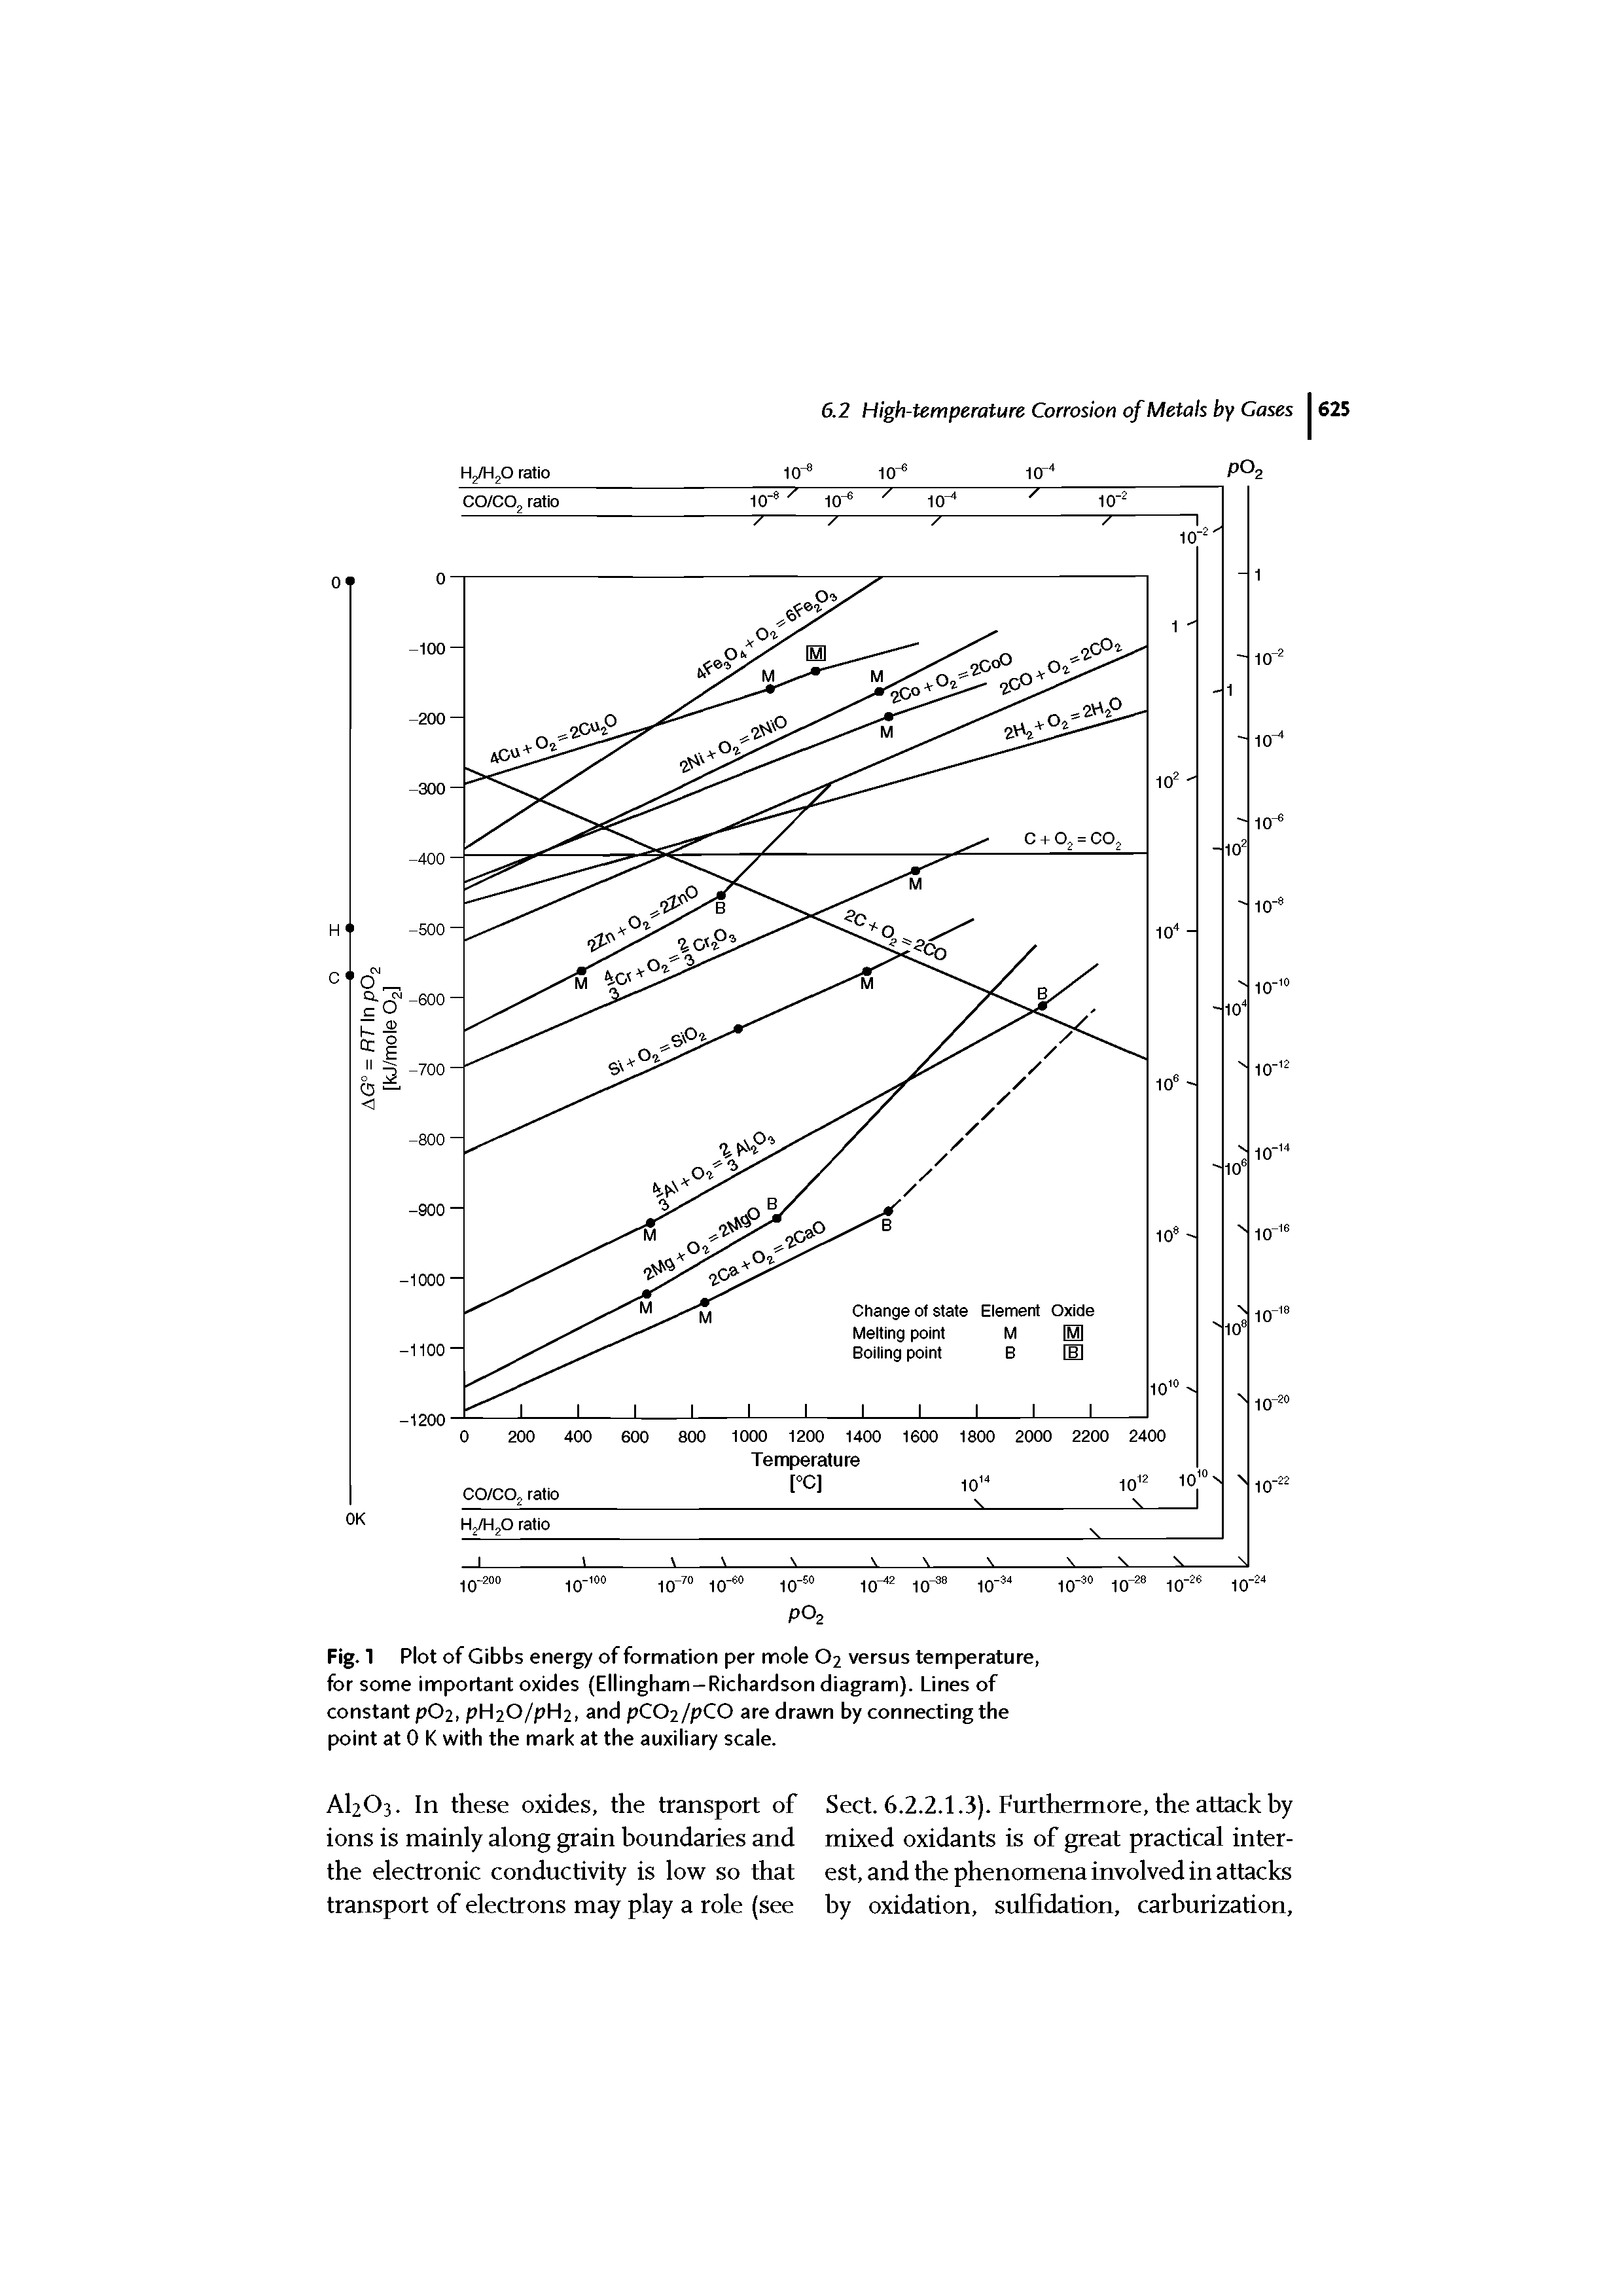 Fig.1 Plot of Gibbs energy of formation per mole O2 versus temperature, for some important oxides (Ellingham-Richardson diagram). Lines of constant p02, PH2O/PH2, and pCOi/pCO are drawn by connecting the point at 0 K with the mark at the auxiliary scale.